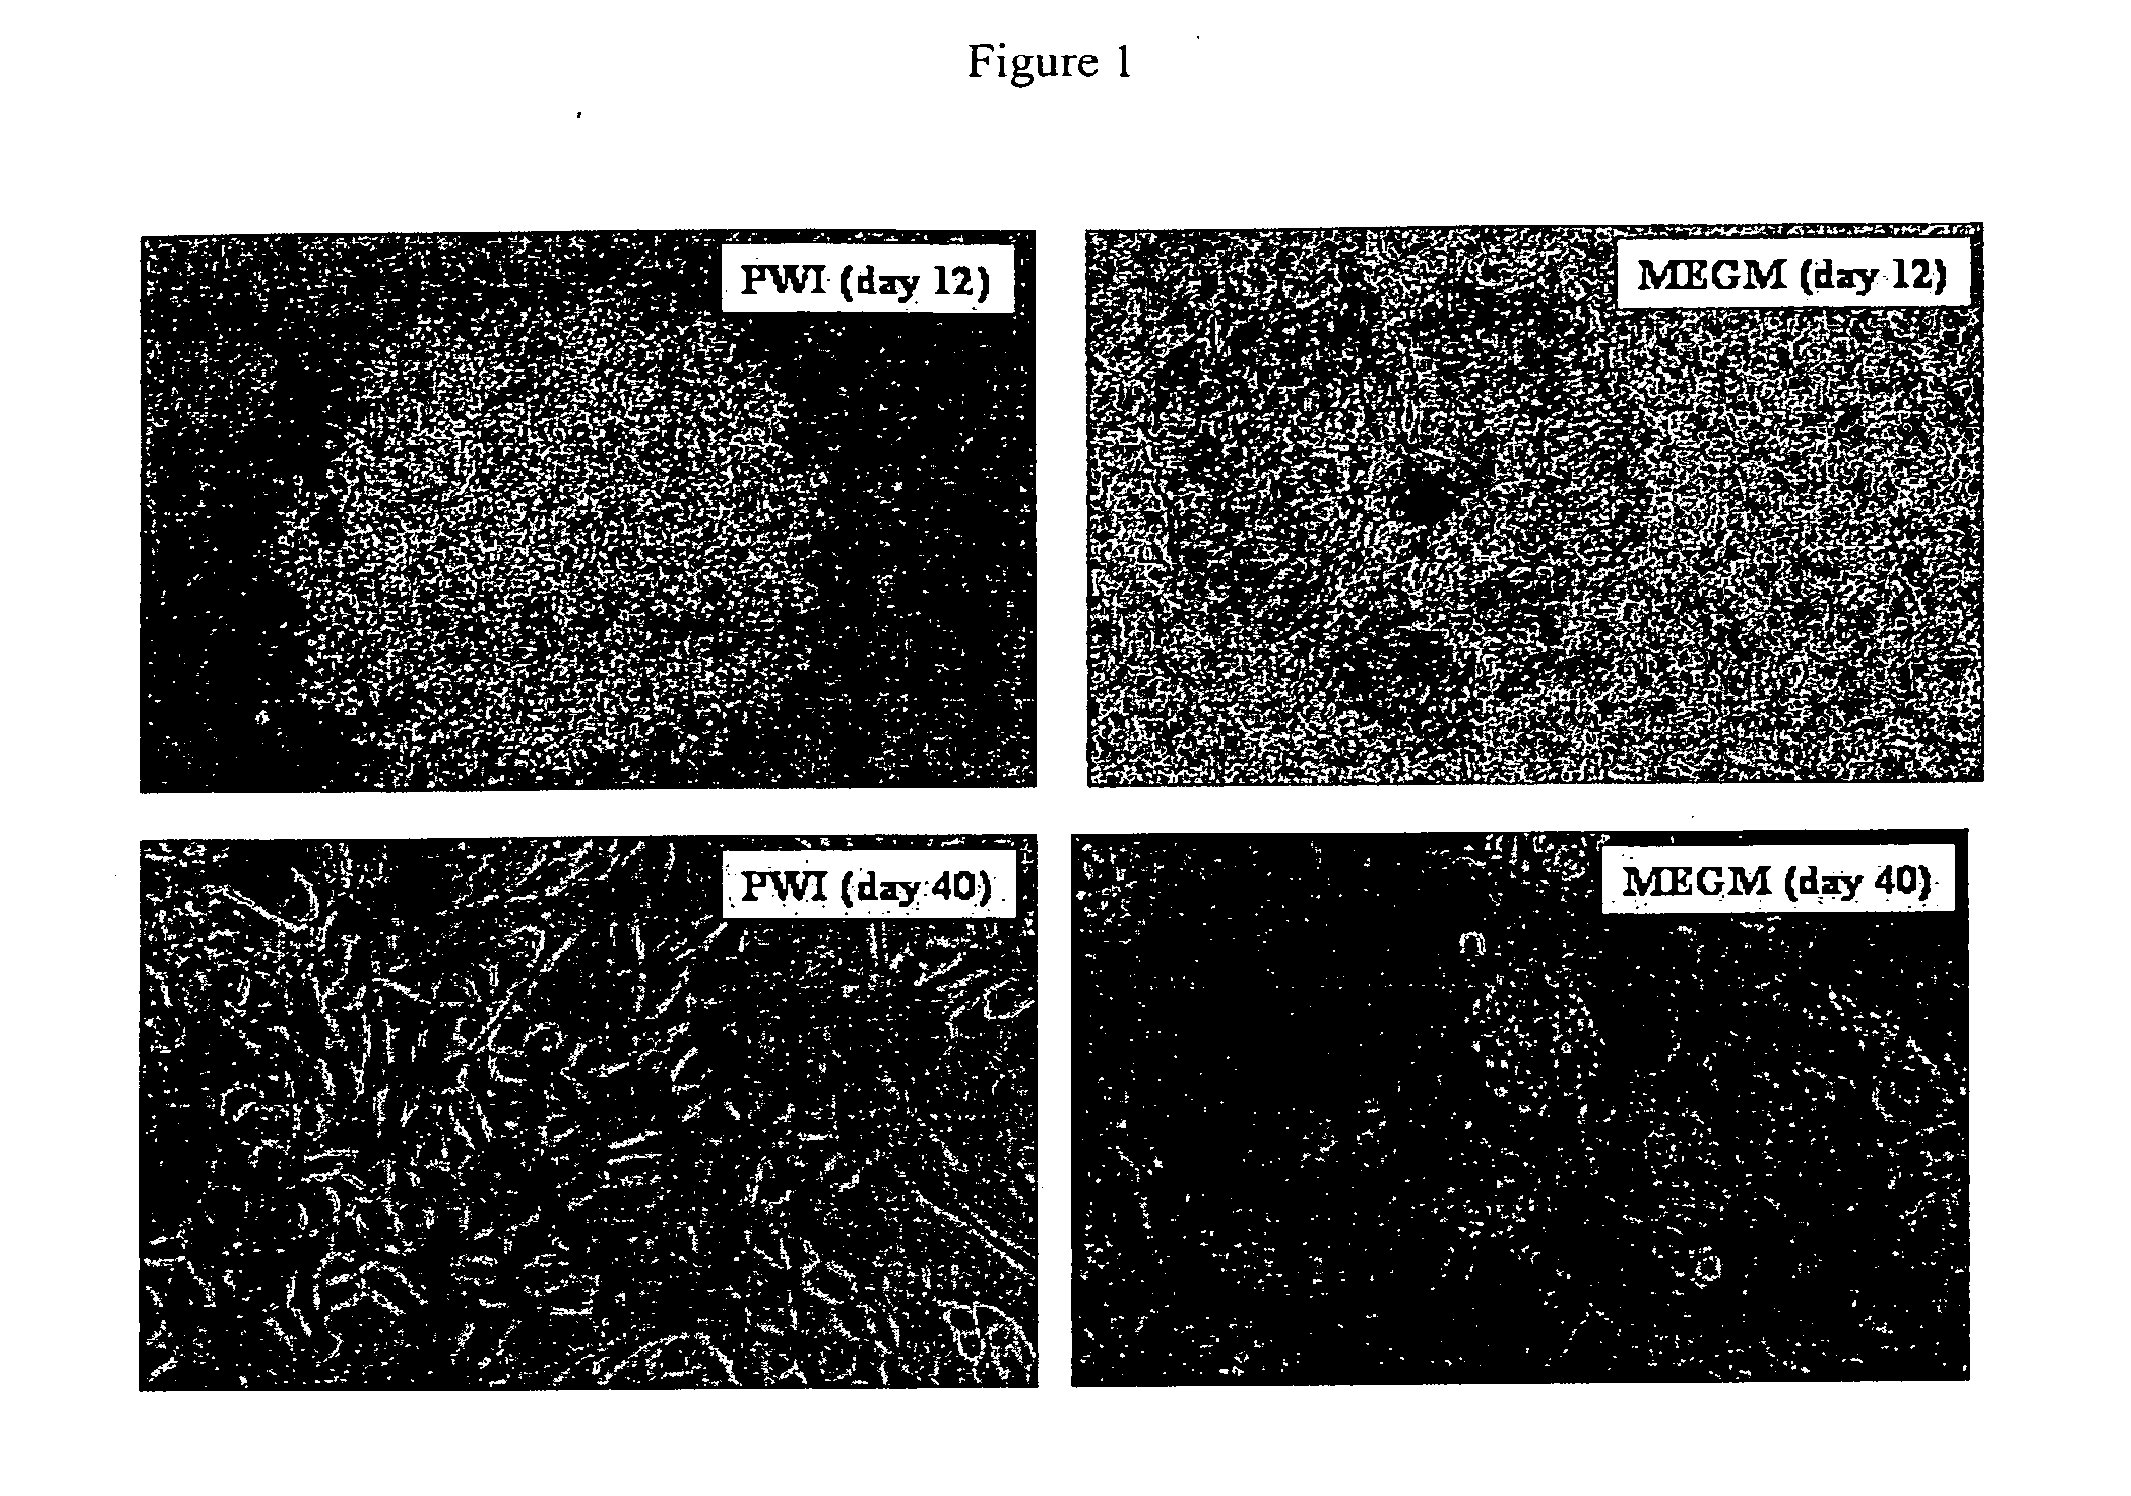 Hormone responsive tissue culture system and uses thereof